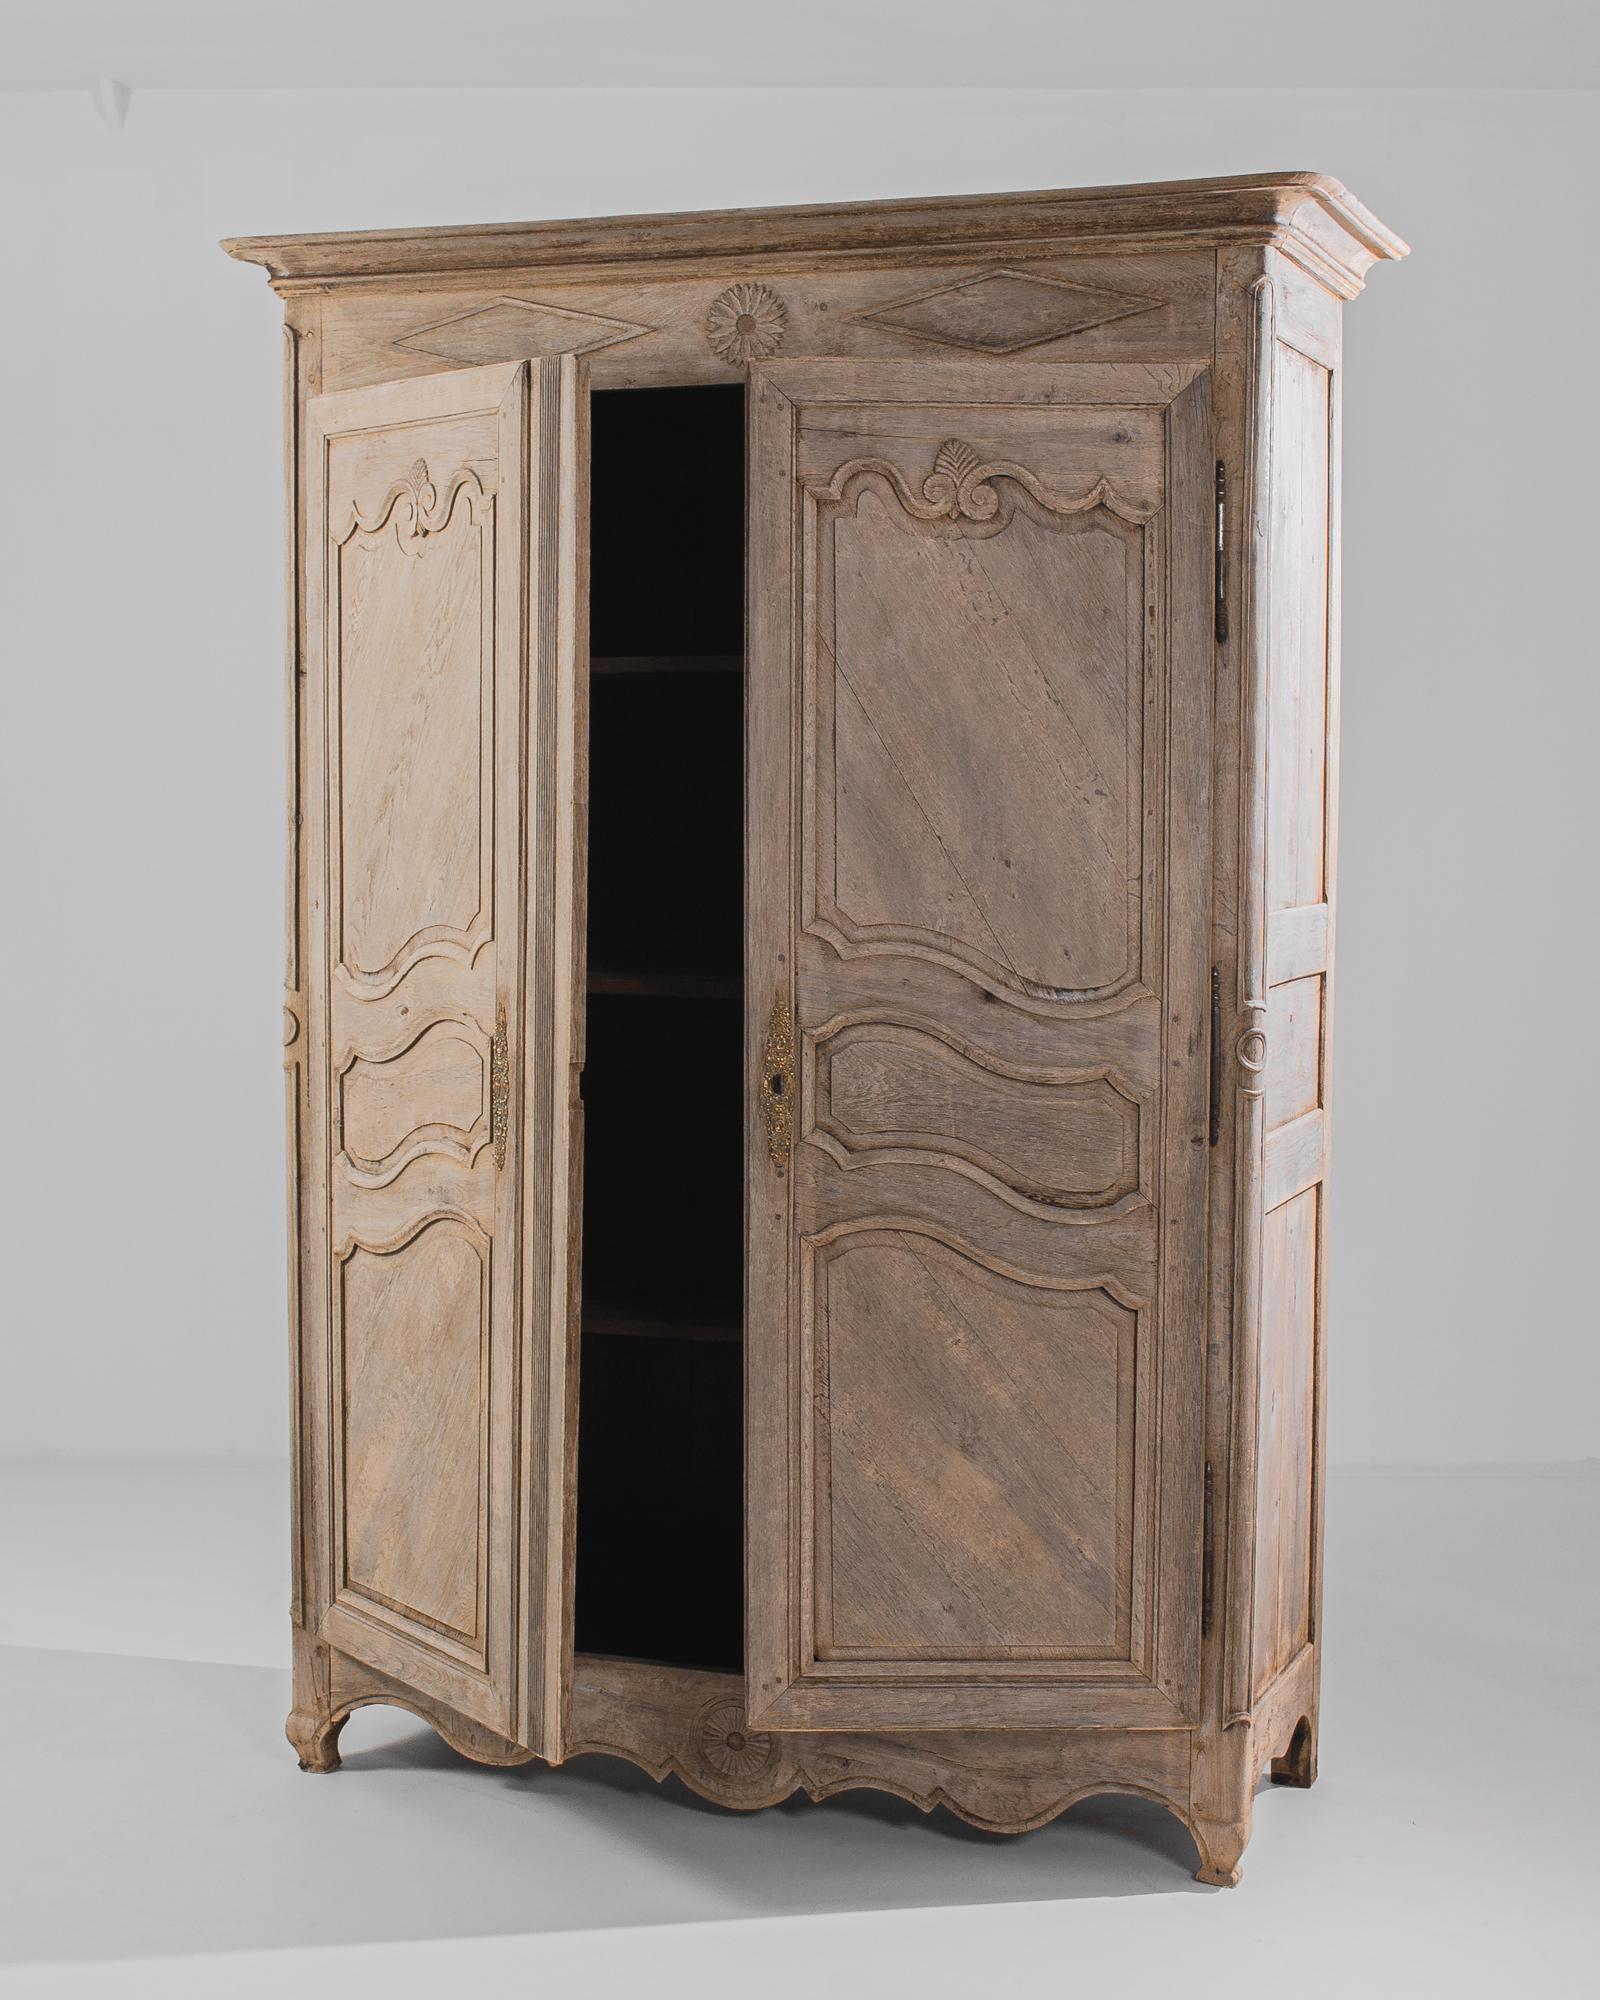 Transporting us to the refined interiors of 19th-century France, this bleached oak armoire stands as a testament to the exquisite craftsmanship and timeless elegance of the era. Crafted with meticulous attention to detail, this piece embodies the